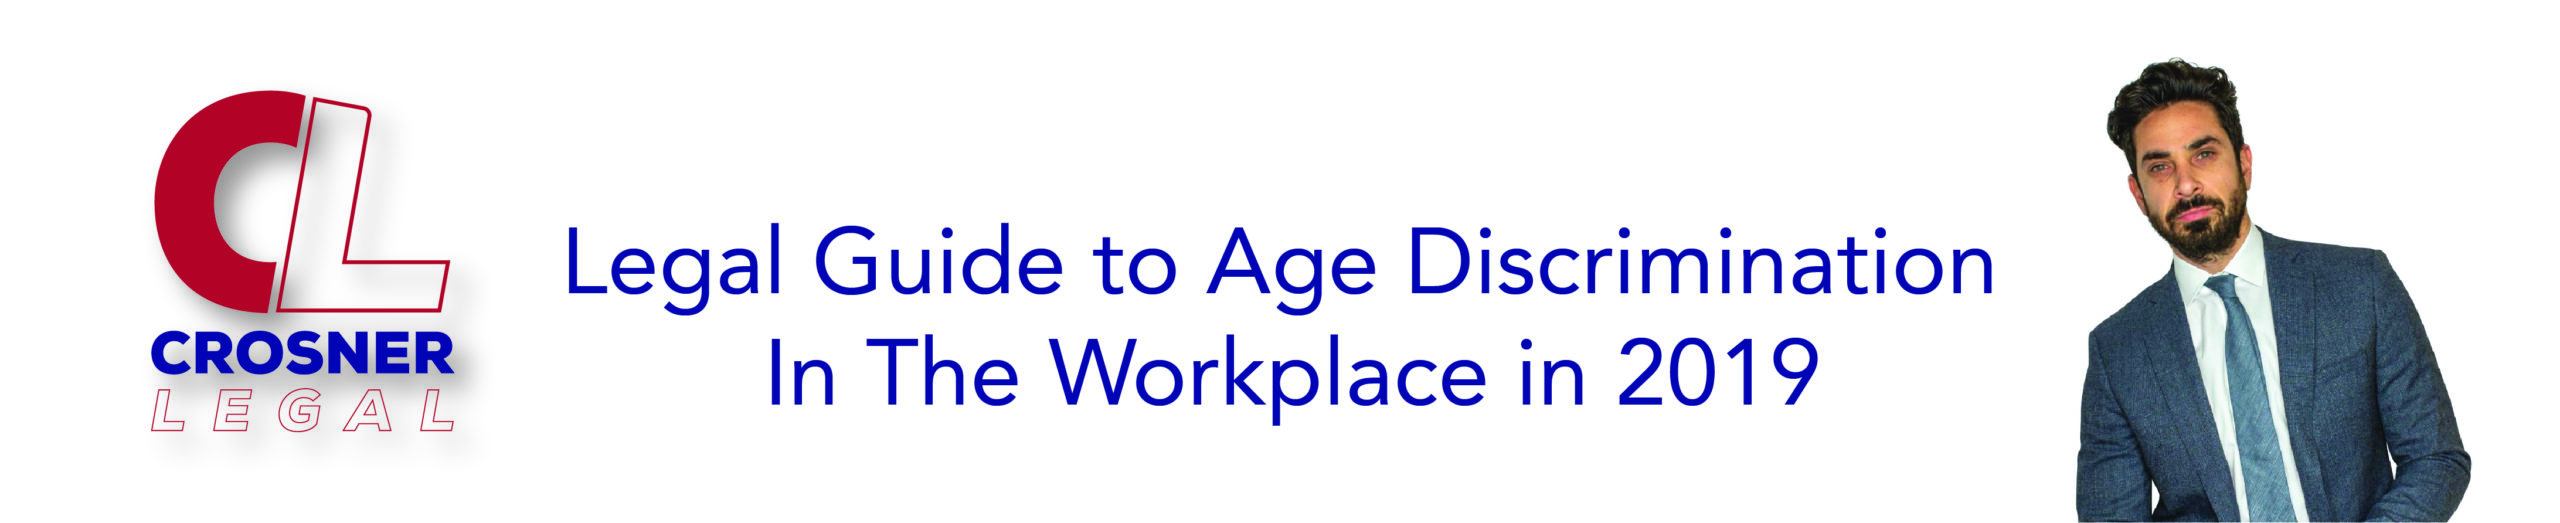 Legal Guide to Age Discrimination In The Workplace in 2019